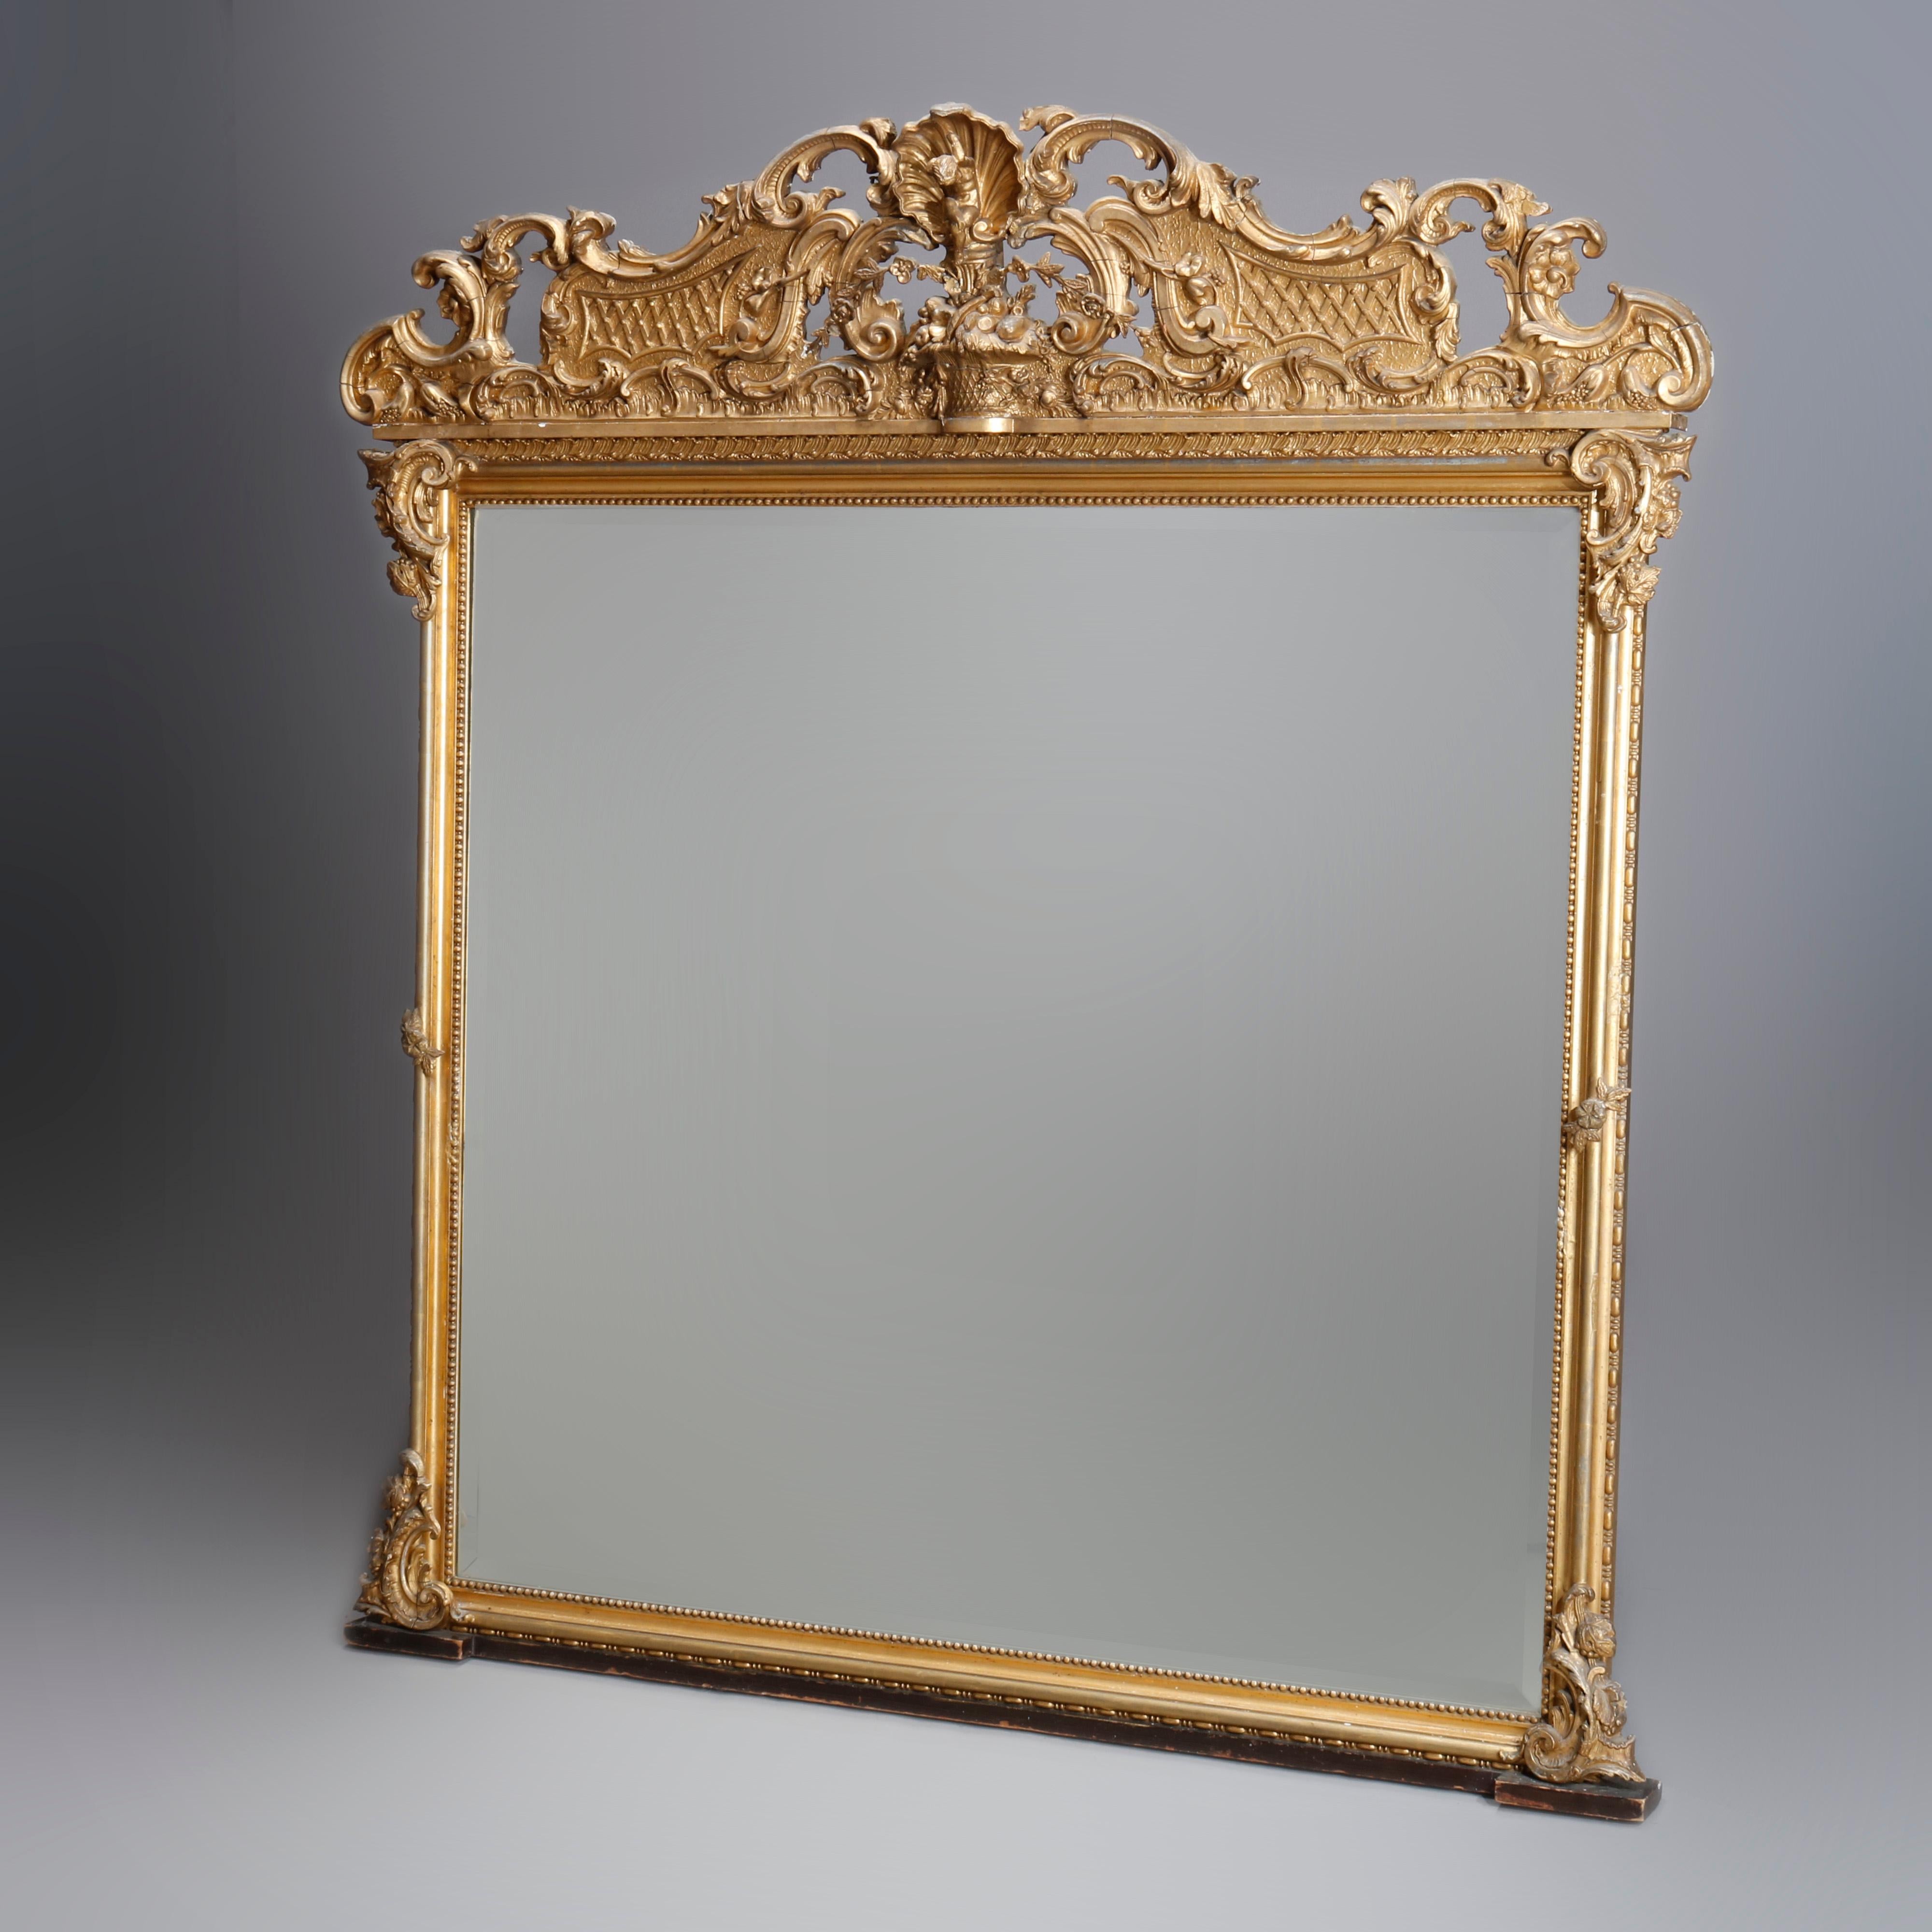 An antique French Louis XIV overmantel mirror offers gold giltwood construction with crest having central panier de fleurs, foliate and scroll elements, frame with beaded trim and scrolled foliate supports, housing beveled mirror, circa